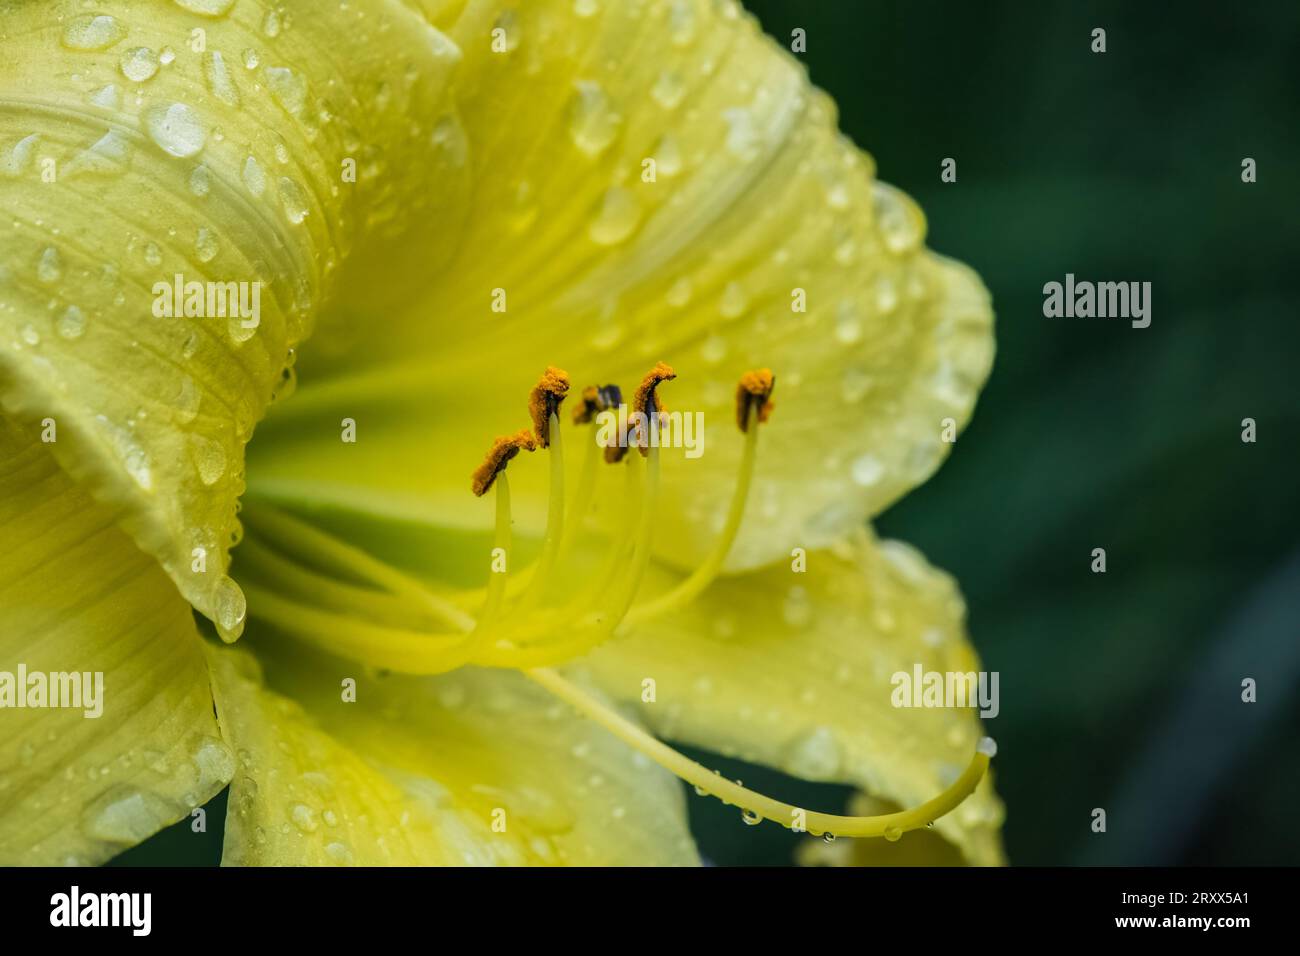 Close up of a yellow lily with water droplets on petals. Stock Photo